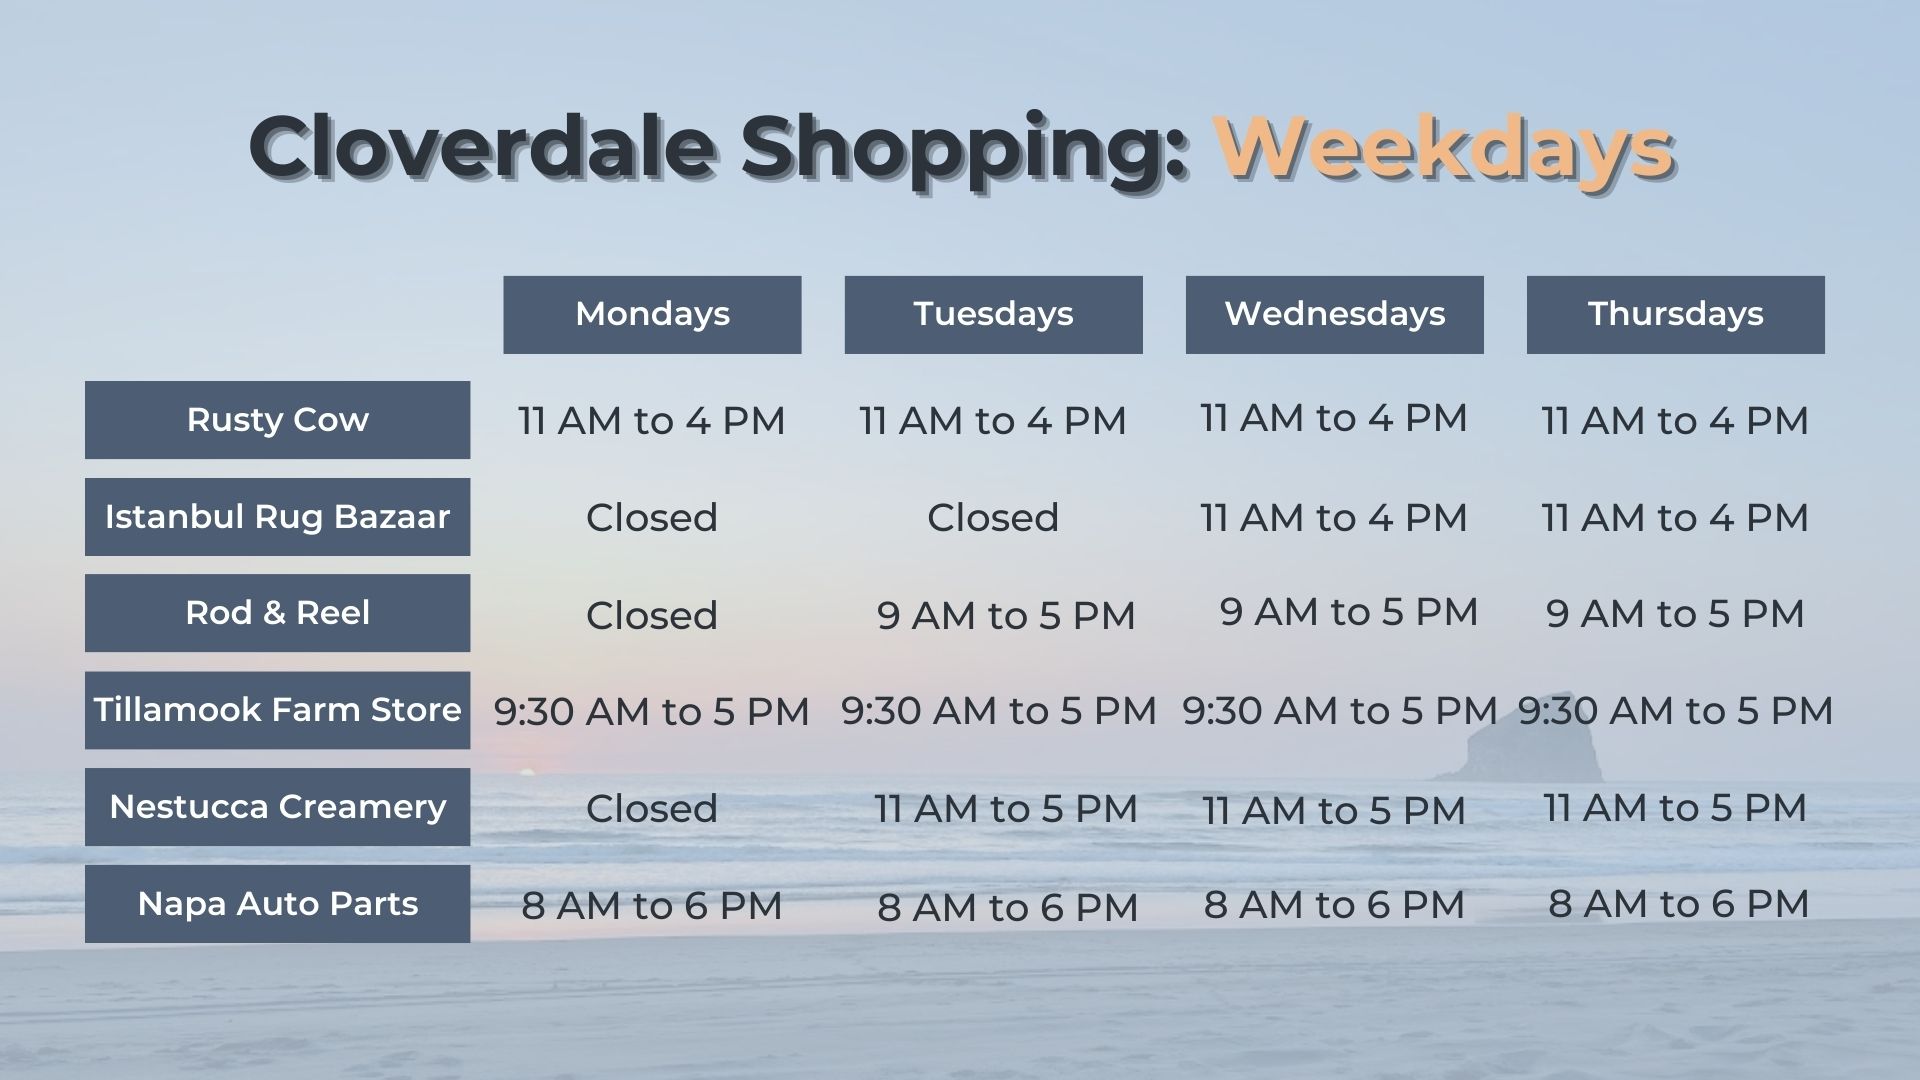 Cloverdale Shops Weekday Hours